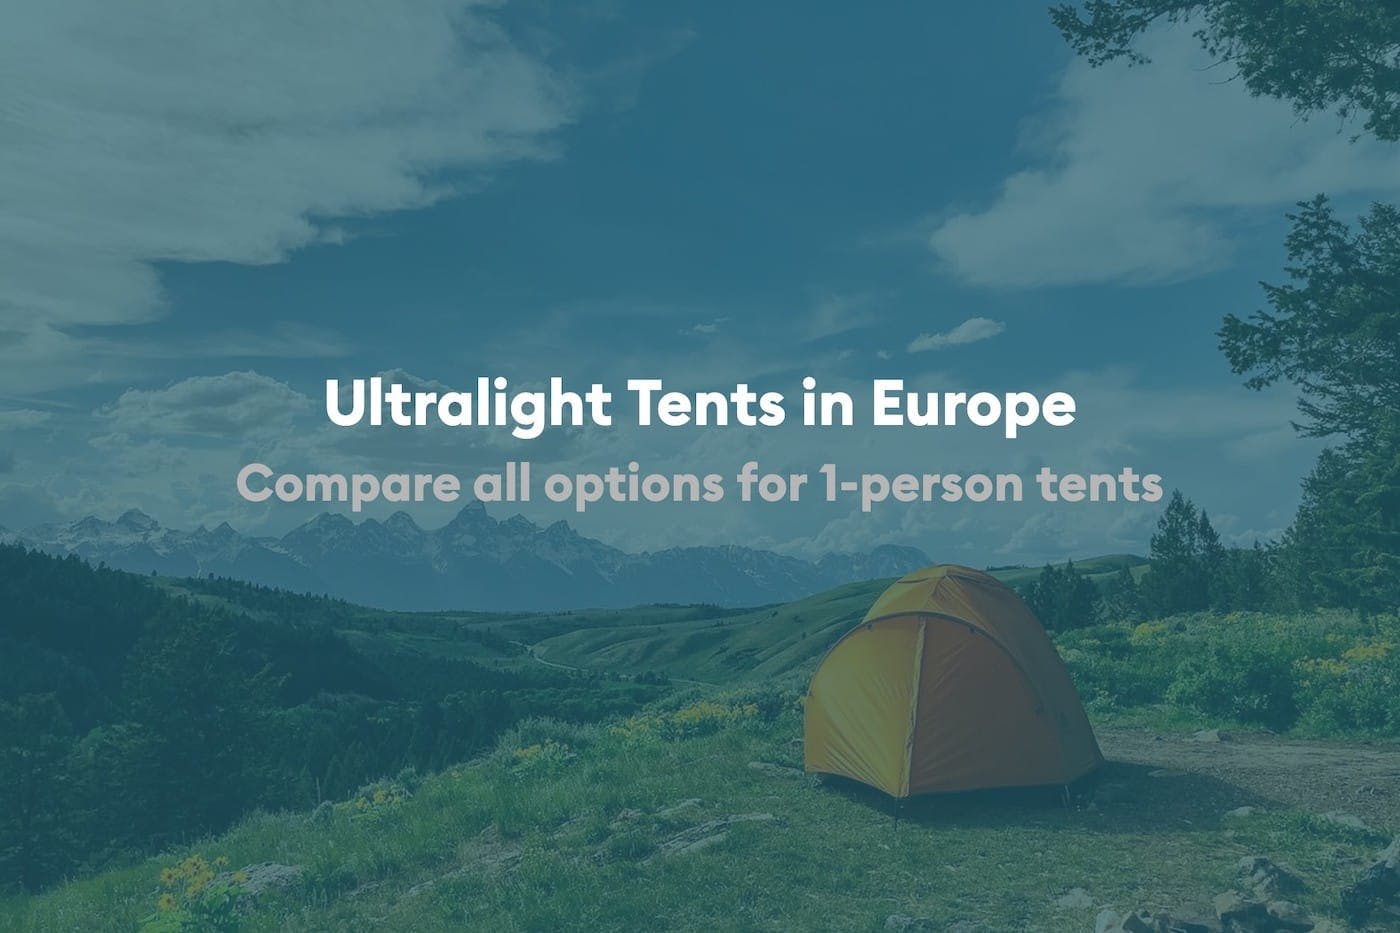 Guide to ultralight tents in Europe - 1 person / Solo